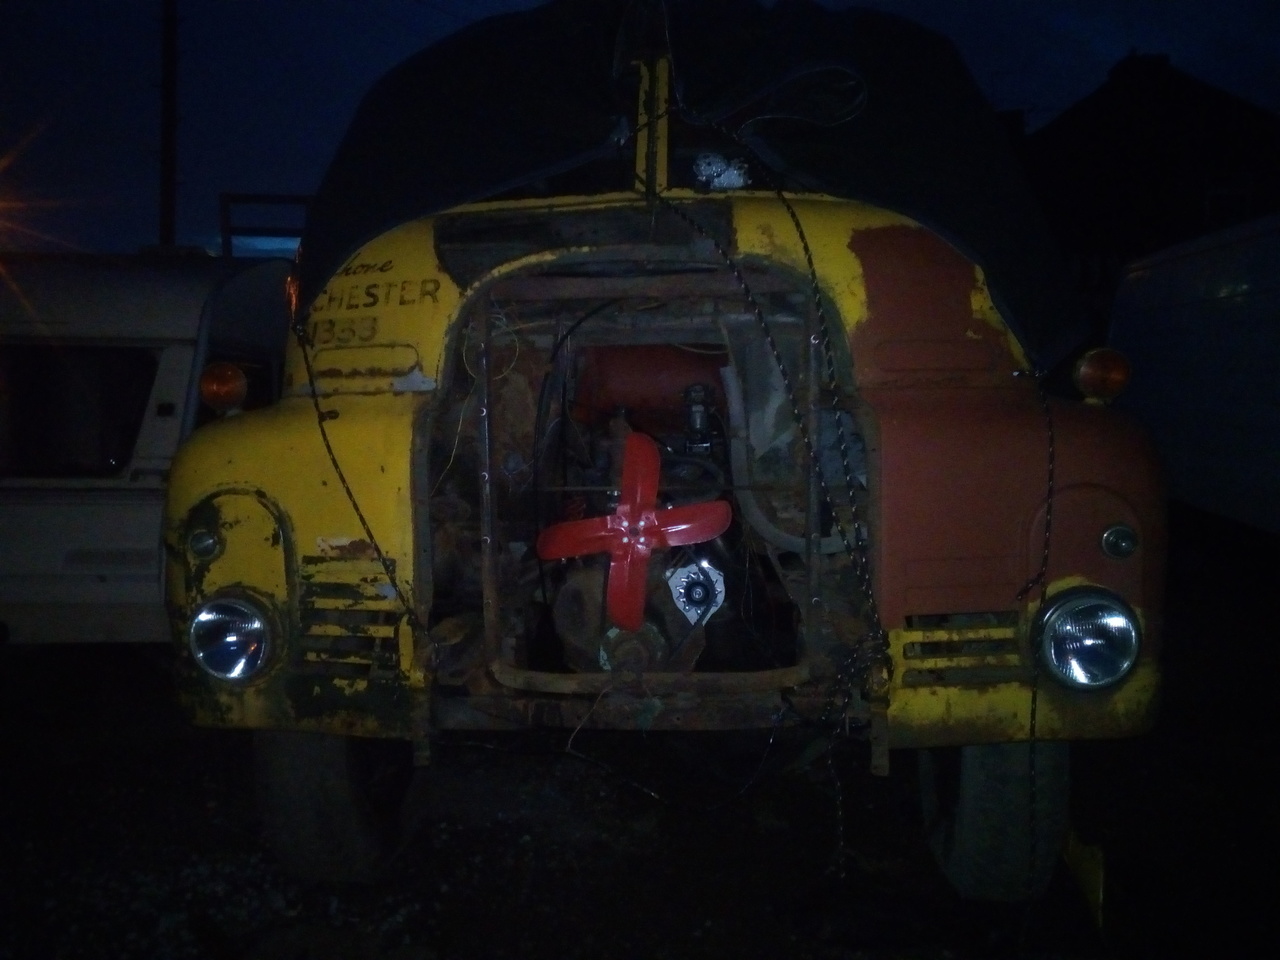 a night-time photograph of the truck, with the front bumper,
grille, and radiator removed. The fan and the engine are now
visible.